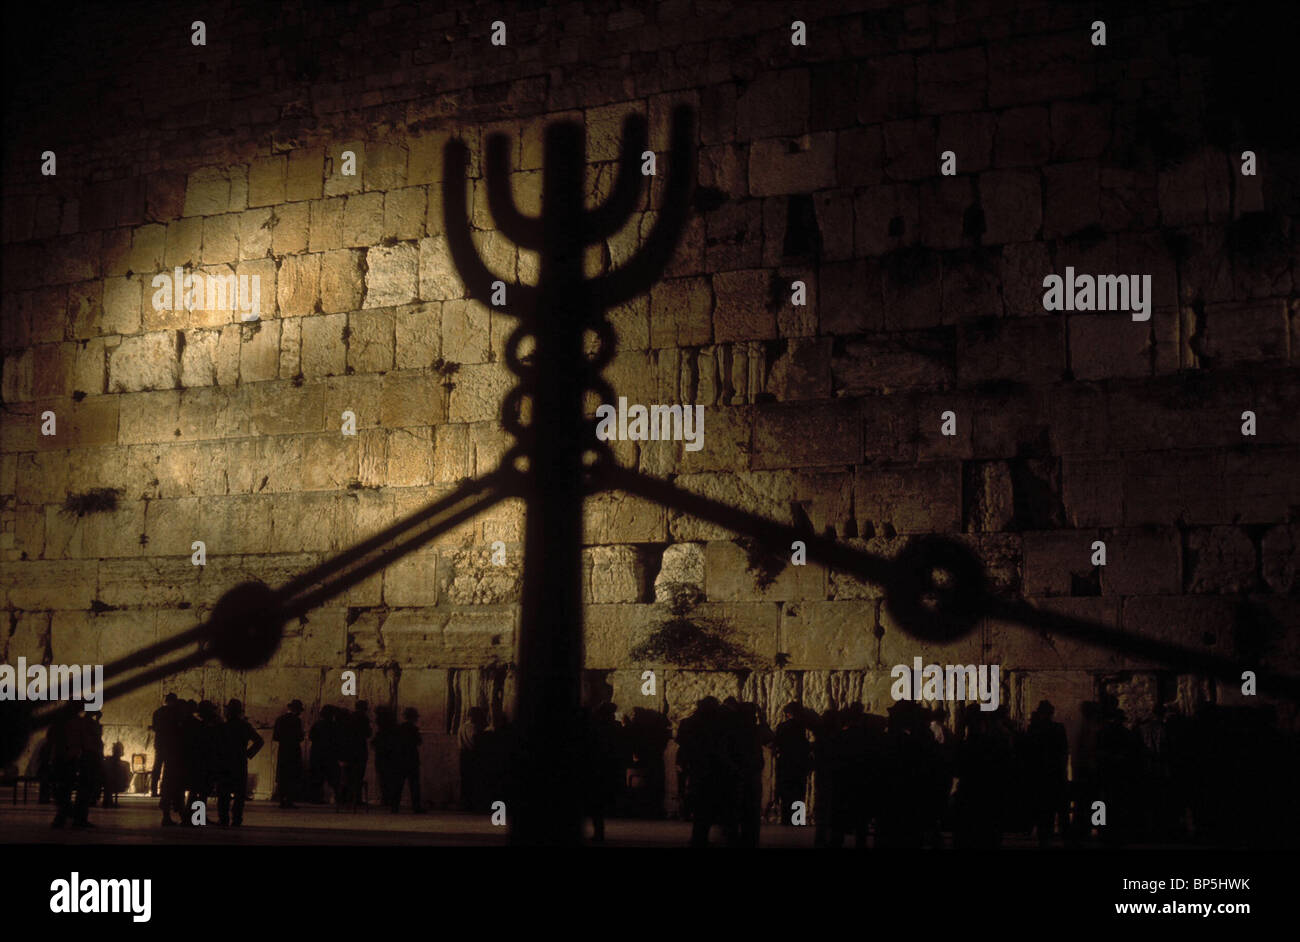 3363. PRAYING AT THE WESTERN WALL GOES ON UNINTERUPTED DAY AND NIGHT Stock Photo